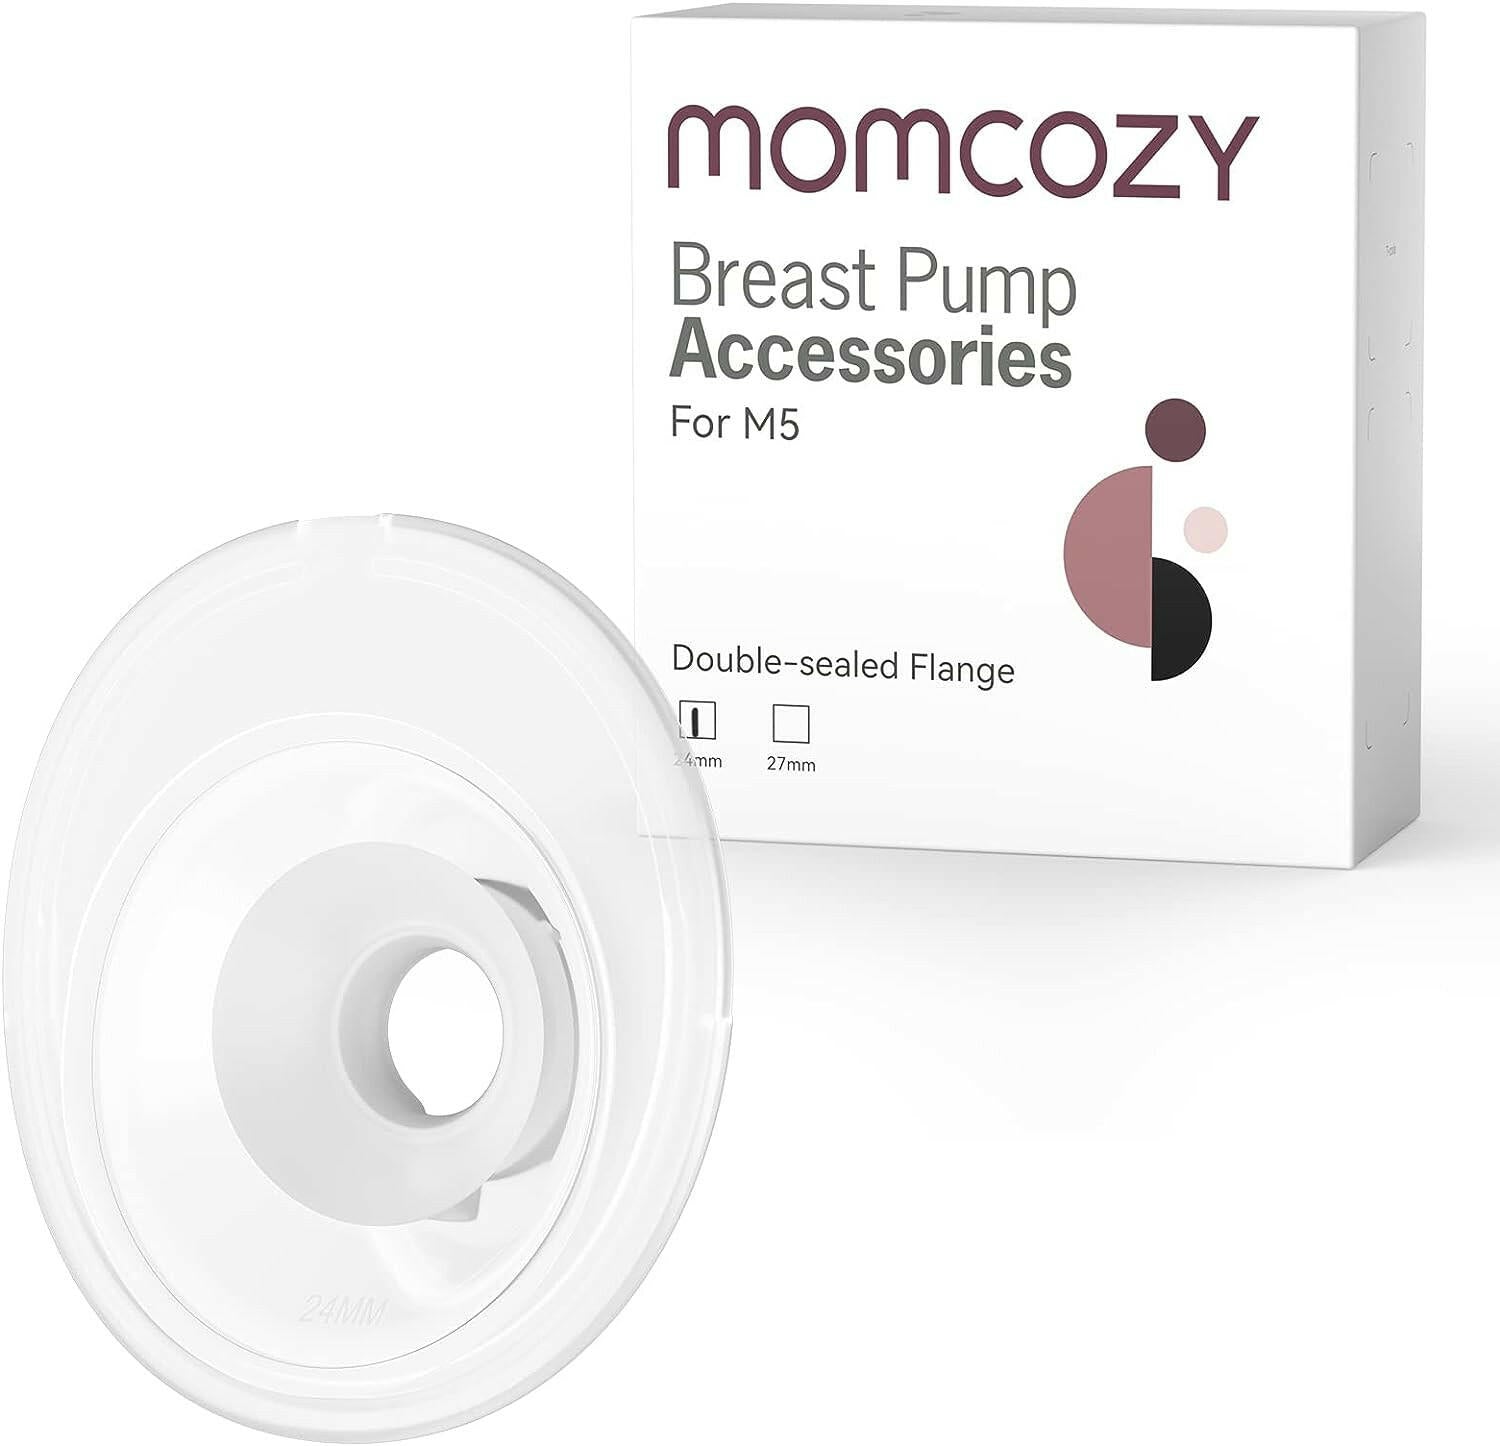 Momcozy Double-Sealed Flange Compatible with Momcozy M5.